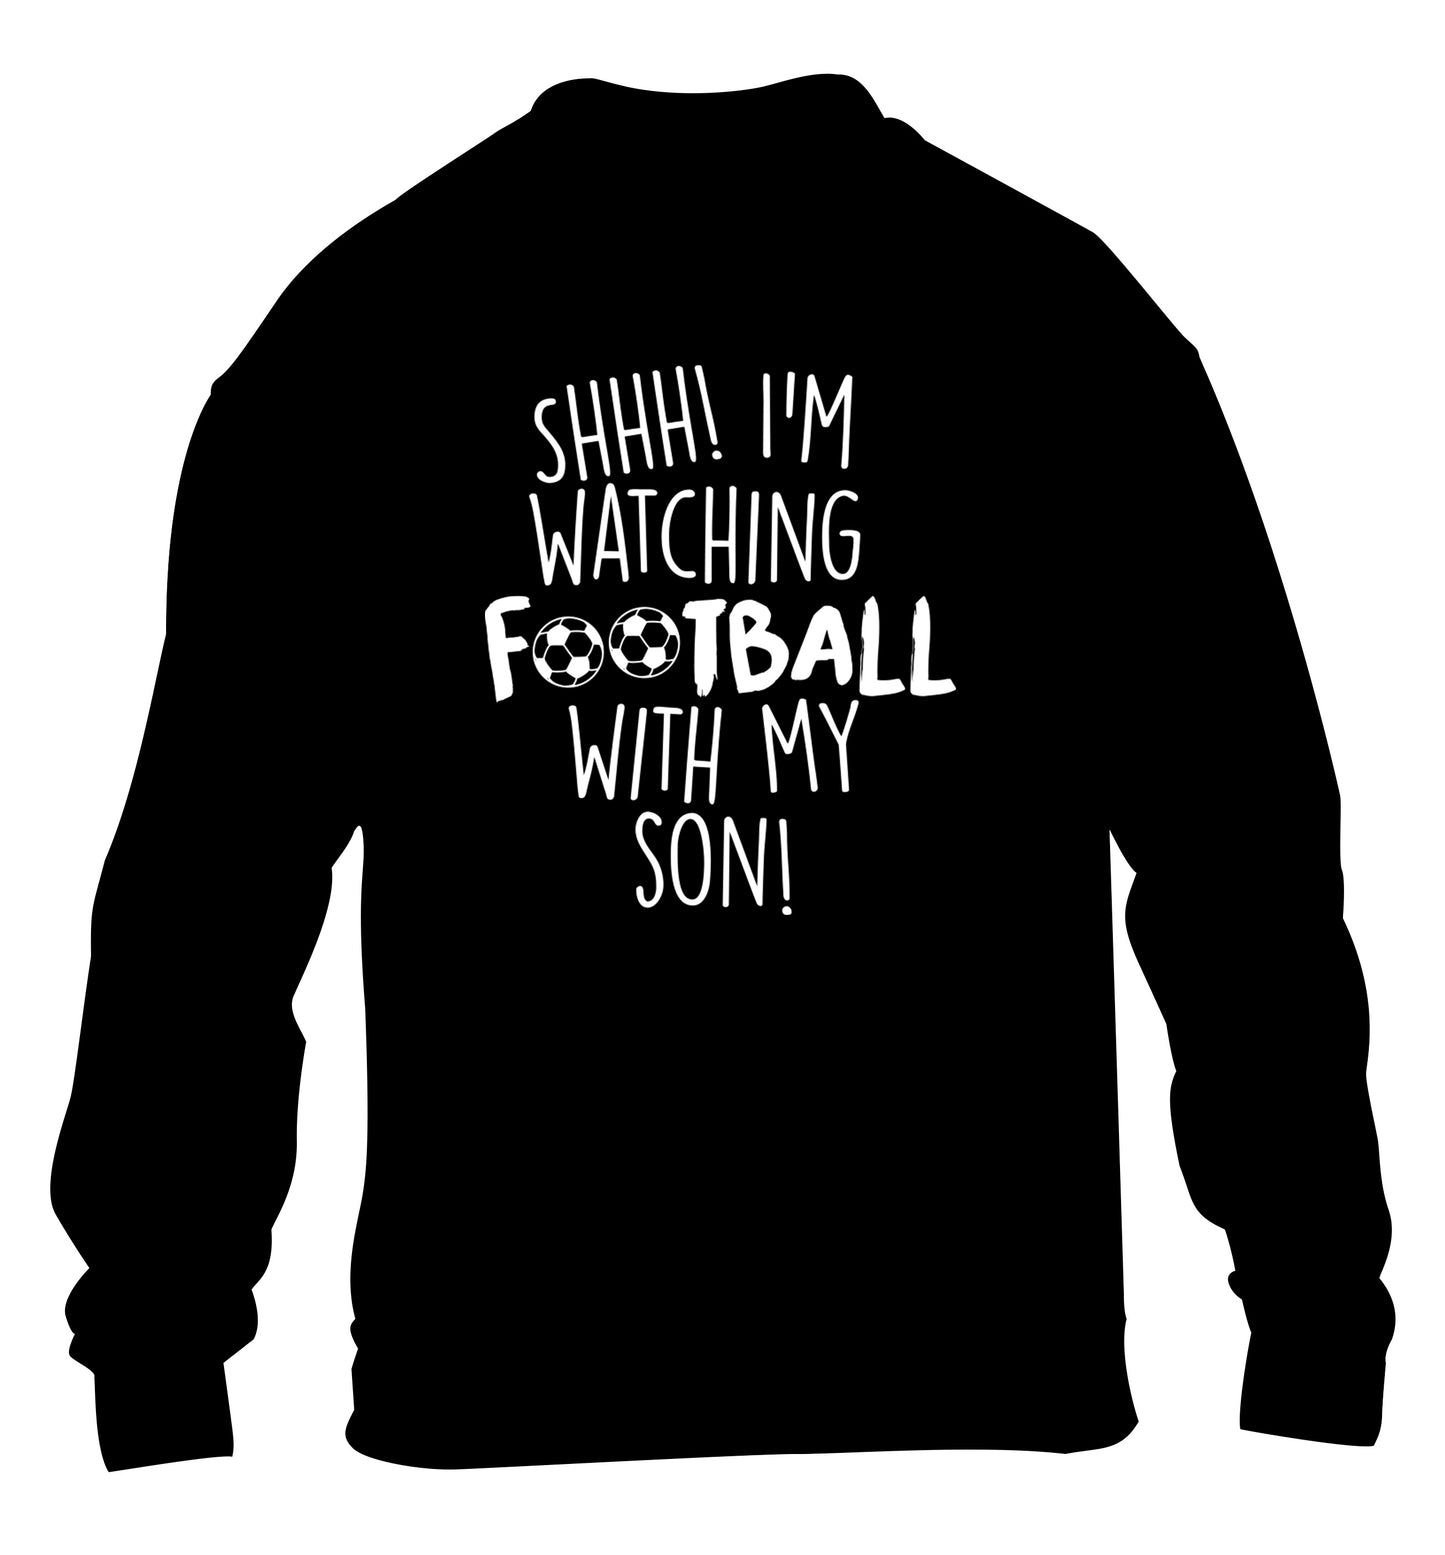 Shhh I'm watching football with my son children's black sweater 12-14 Years